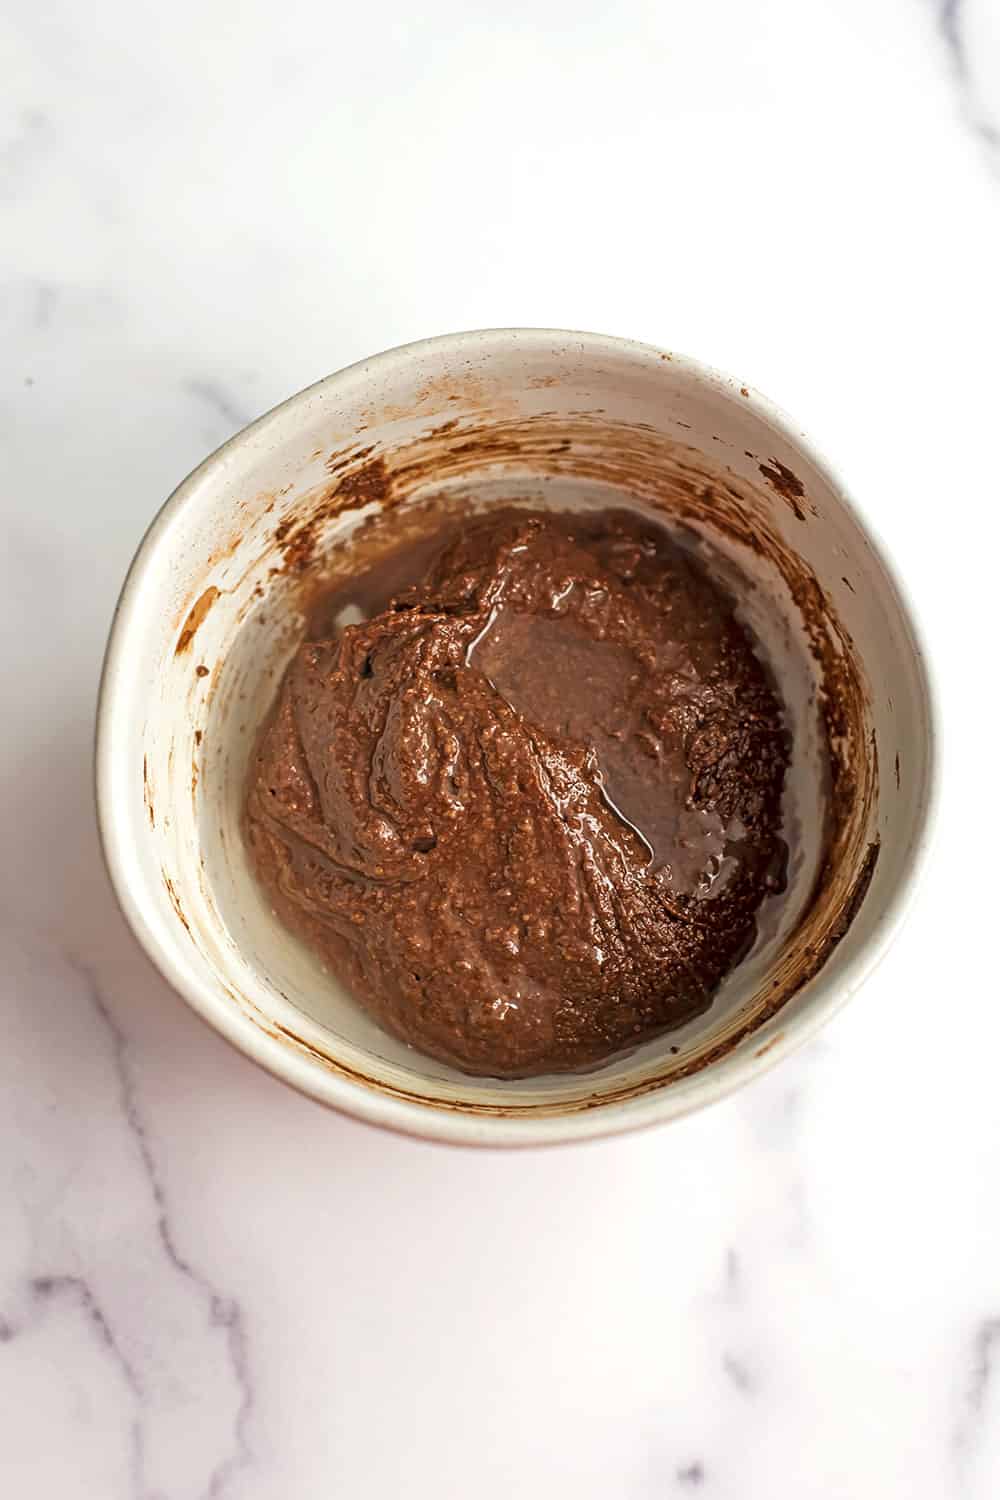 water added to bowl with chocolate tahini spread.